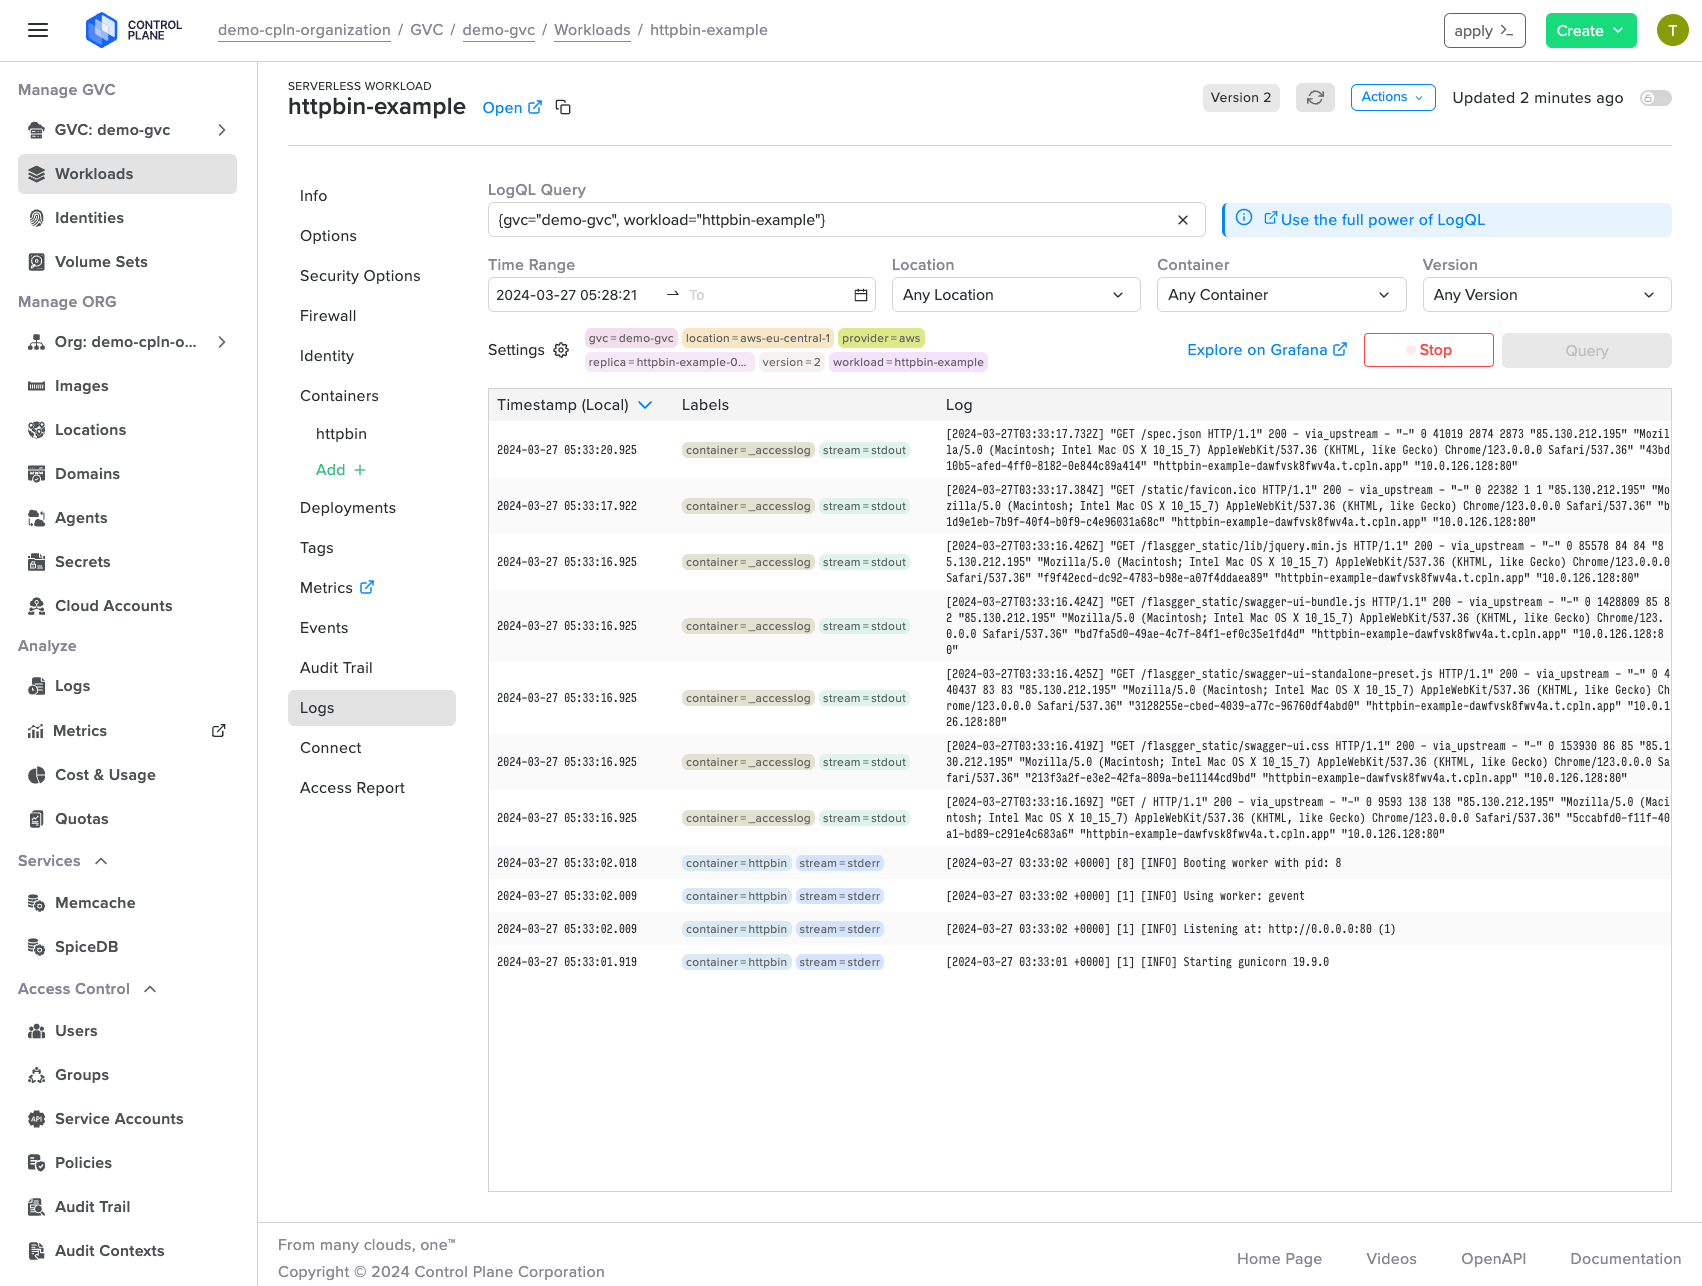 Screenshot shows the Control Plane's centralized log management interface, where users can query and view application logs across their Global Virtual Cloud.